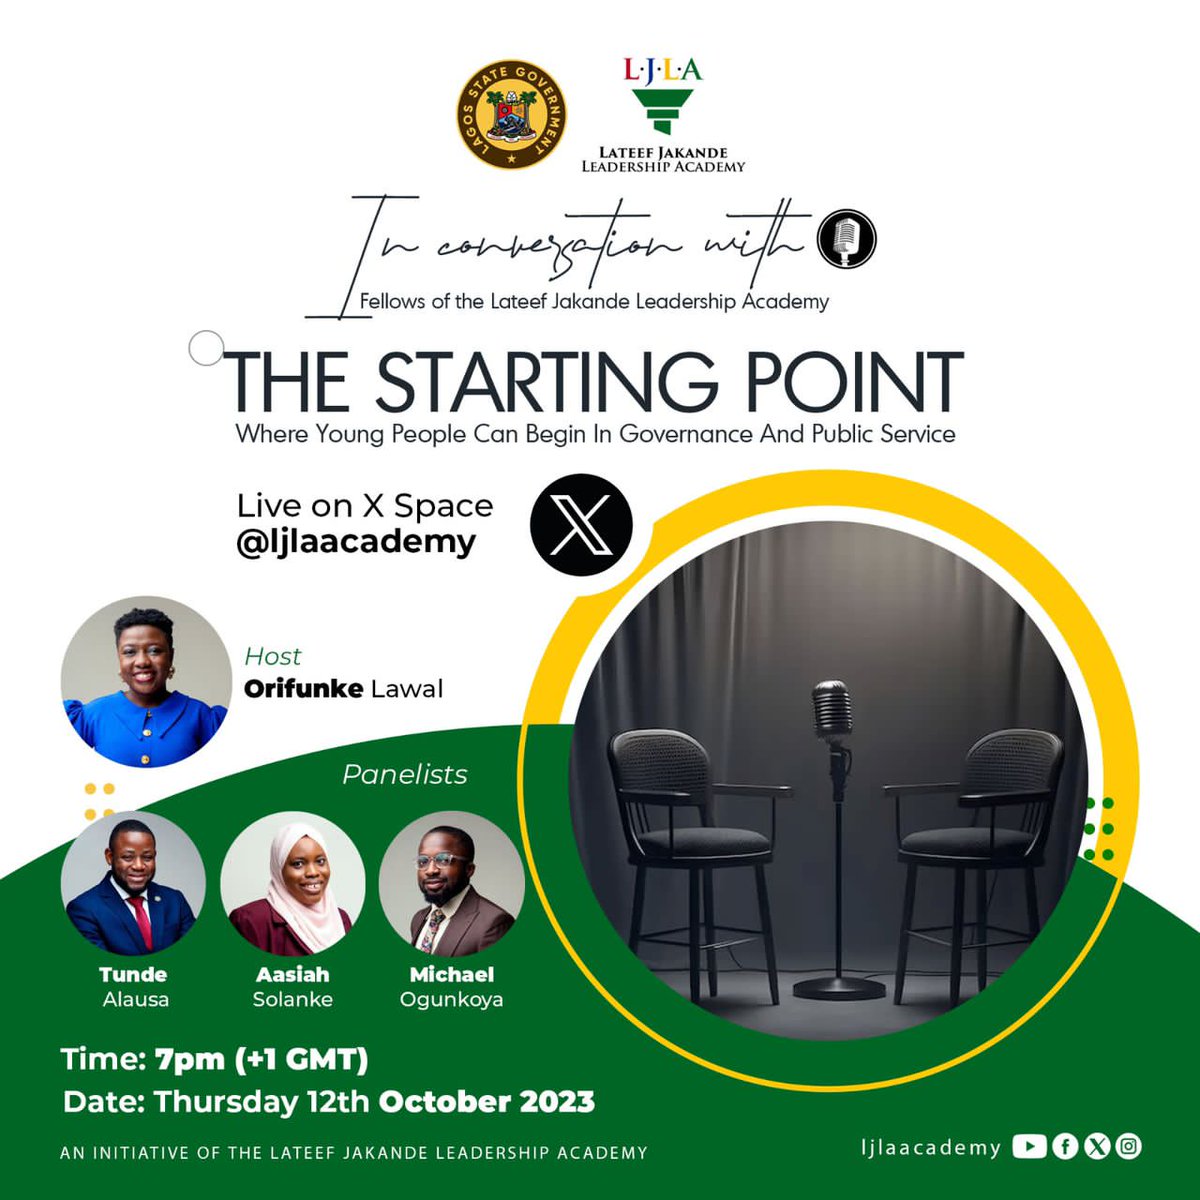 ICYMI: Join me #InConversationWith some of my colleagues at the Lateef Jakande Leadership Academy, as we have enlightening discussions tonight.

We'll be discussing starting out in public service and governance as well as our journey so far even as starters.

See you at 7!